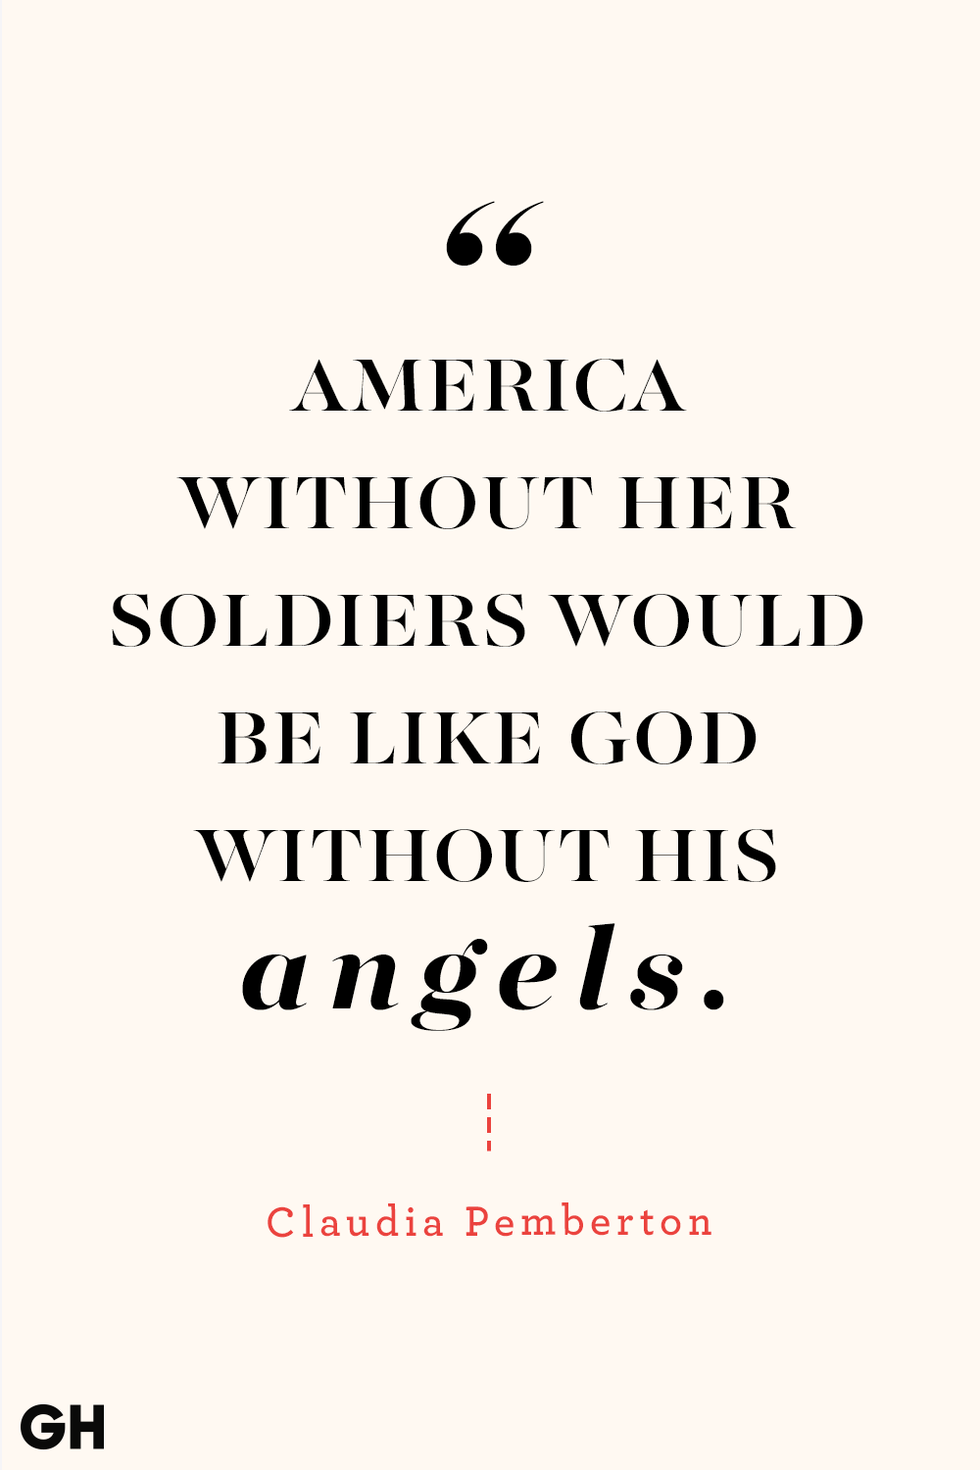 44 Famous Memorial Day Quotes to Honor America's Fallen Heroes